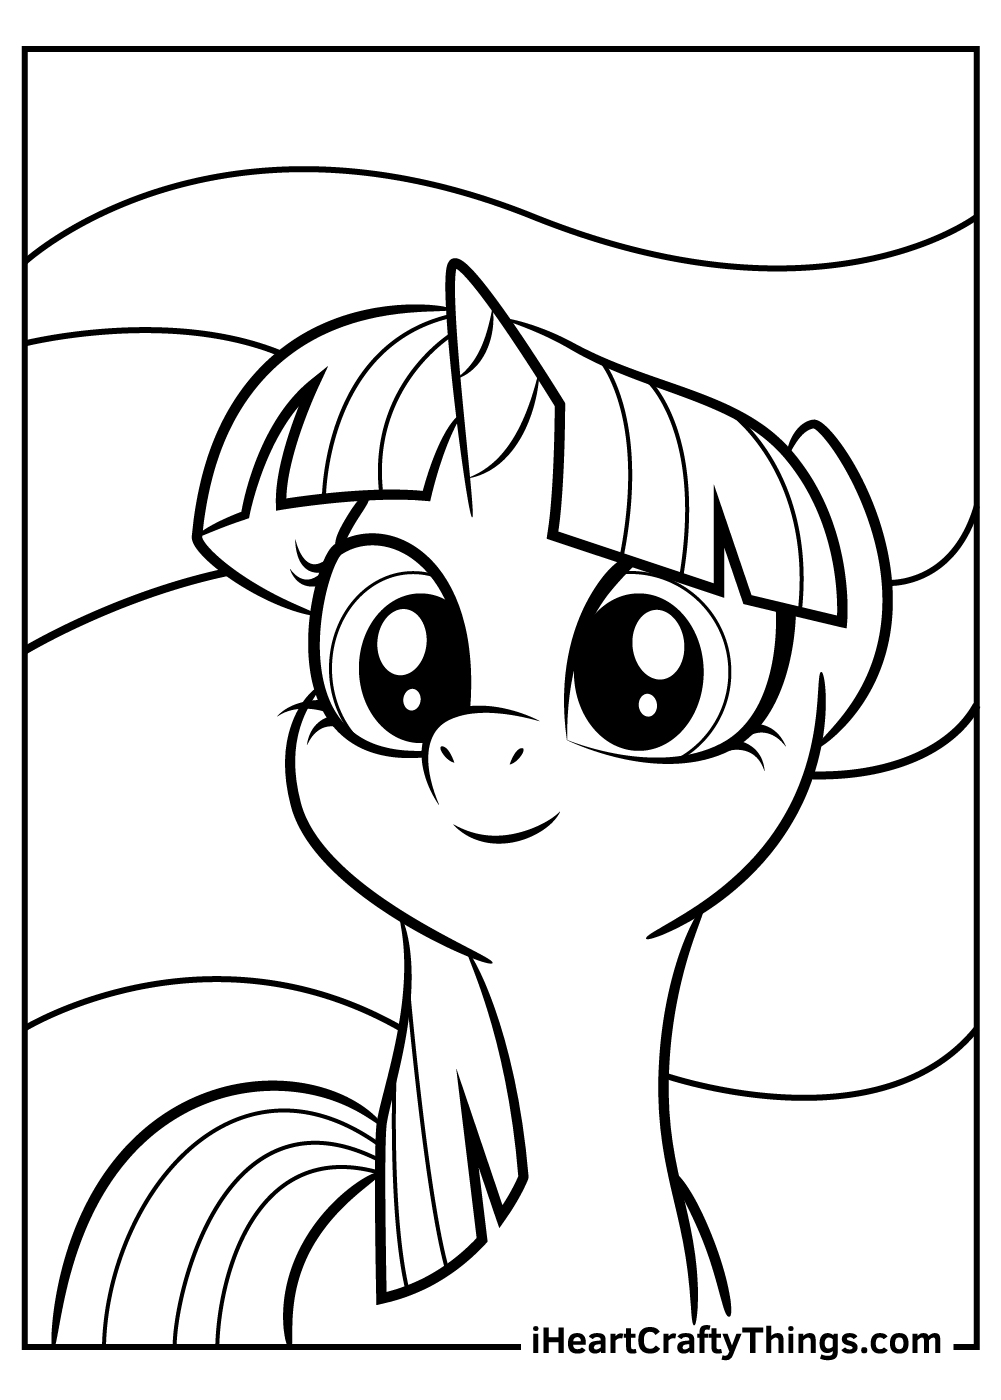 My Little Pony Coloring Pages (Updated 2021)